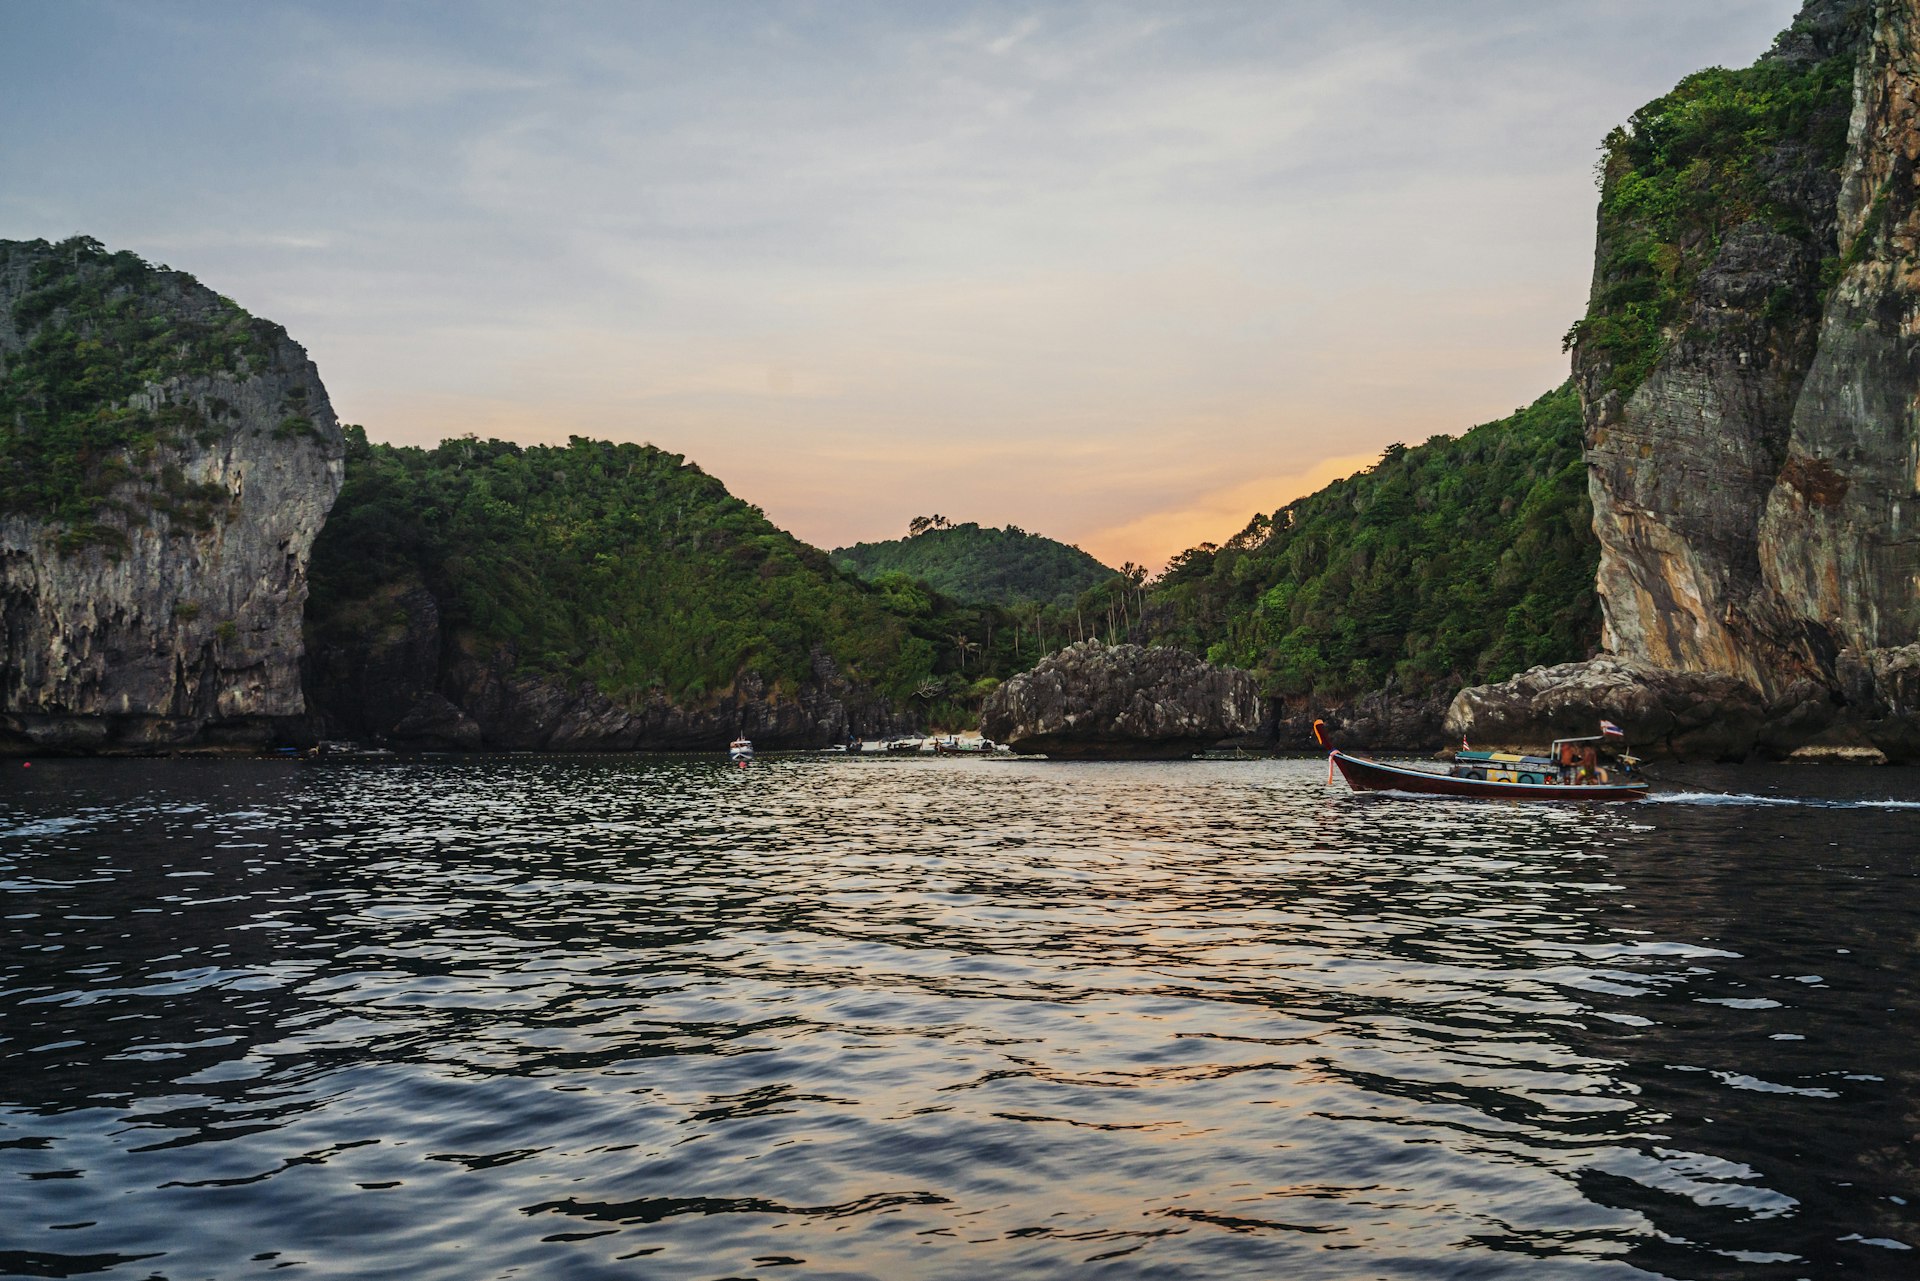 A shot taken from the water facing towards the shore, which is dotted with large rocky cliffs covered in vegetation. A small colorful fishing boat sails by